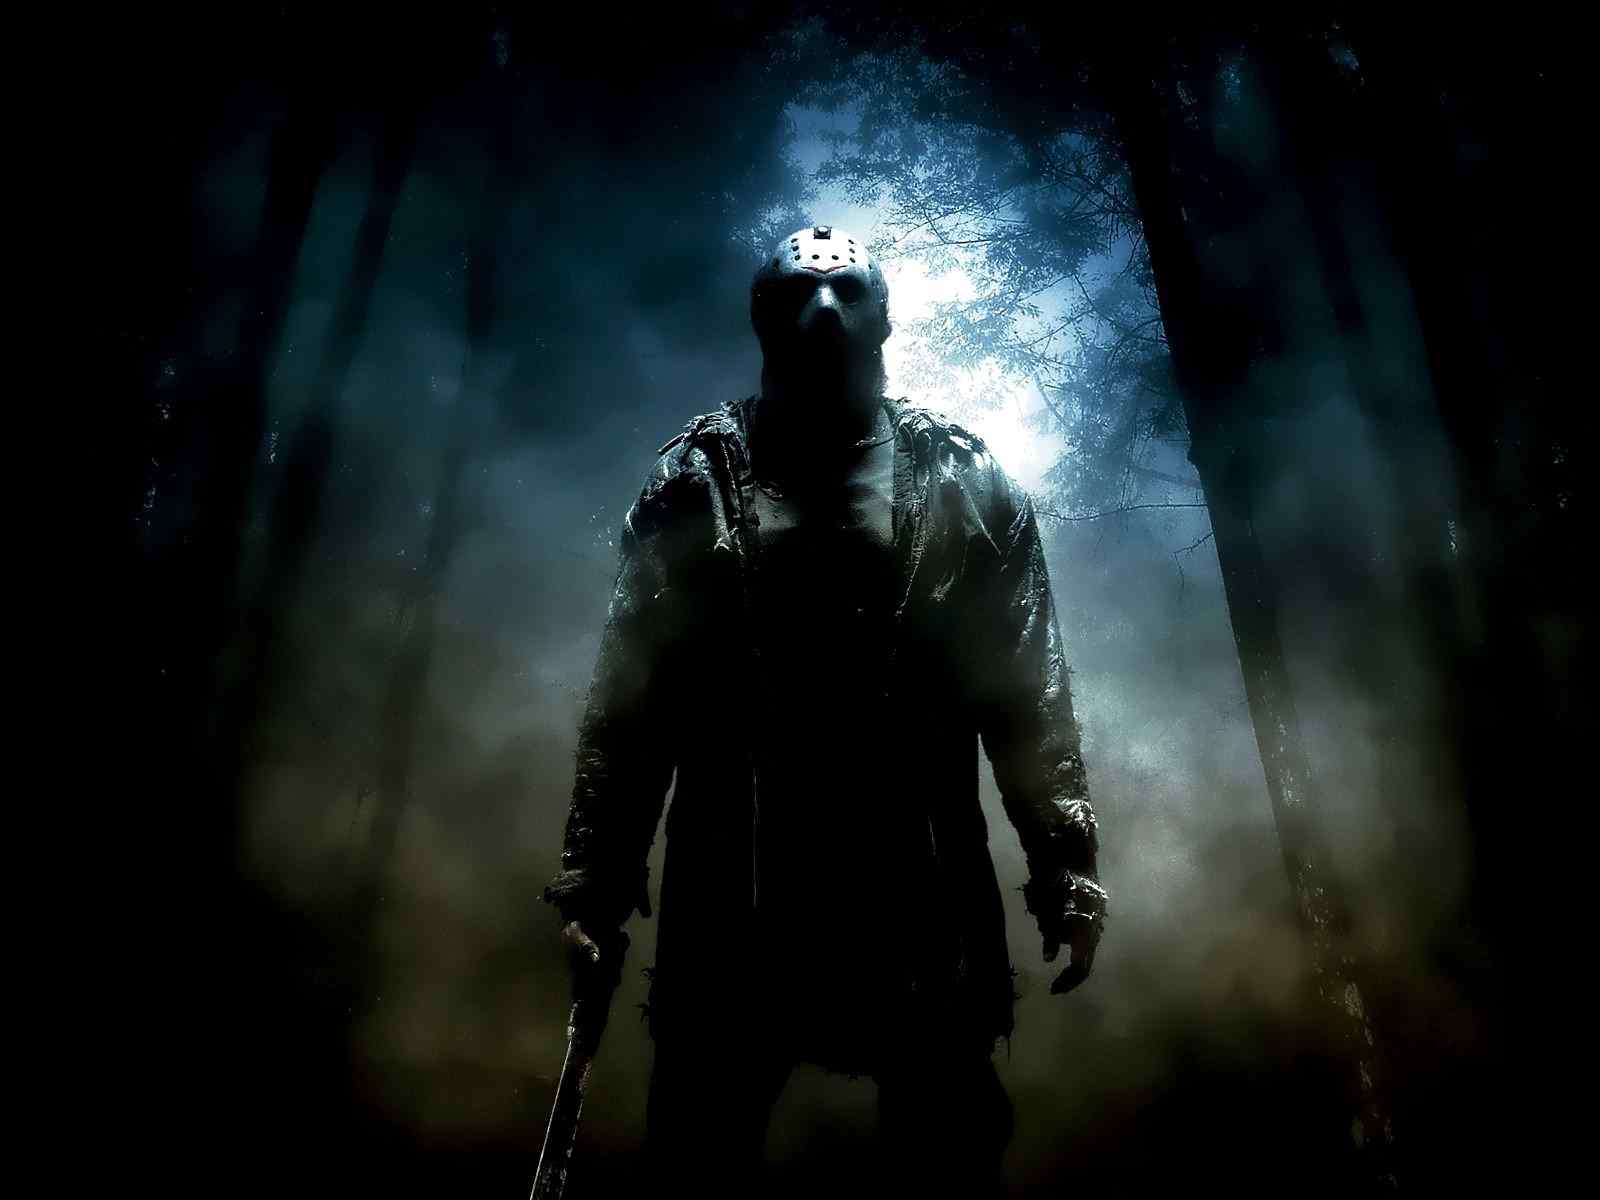 Friday the 13th. All the actors who have helped shape the character Jason Voorhees from friday the 13th.